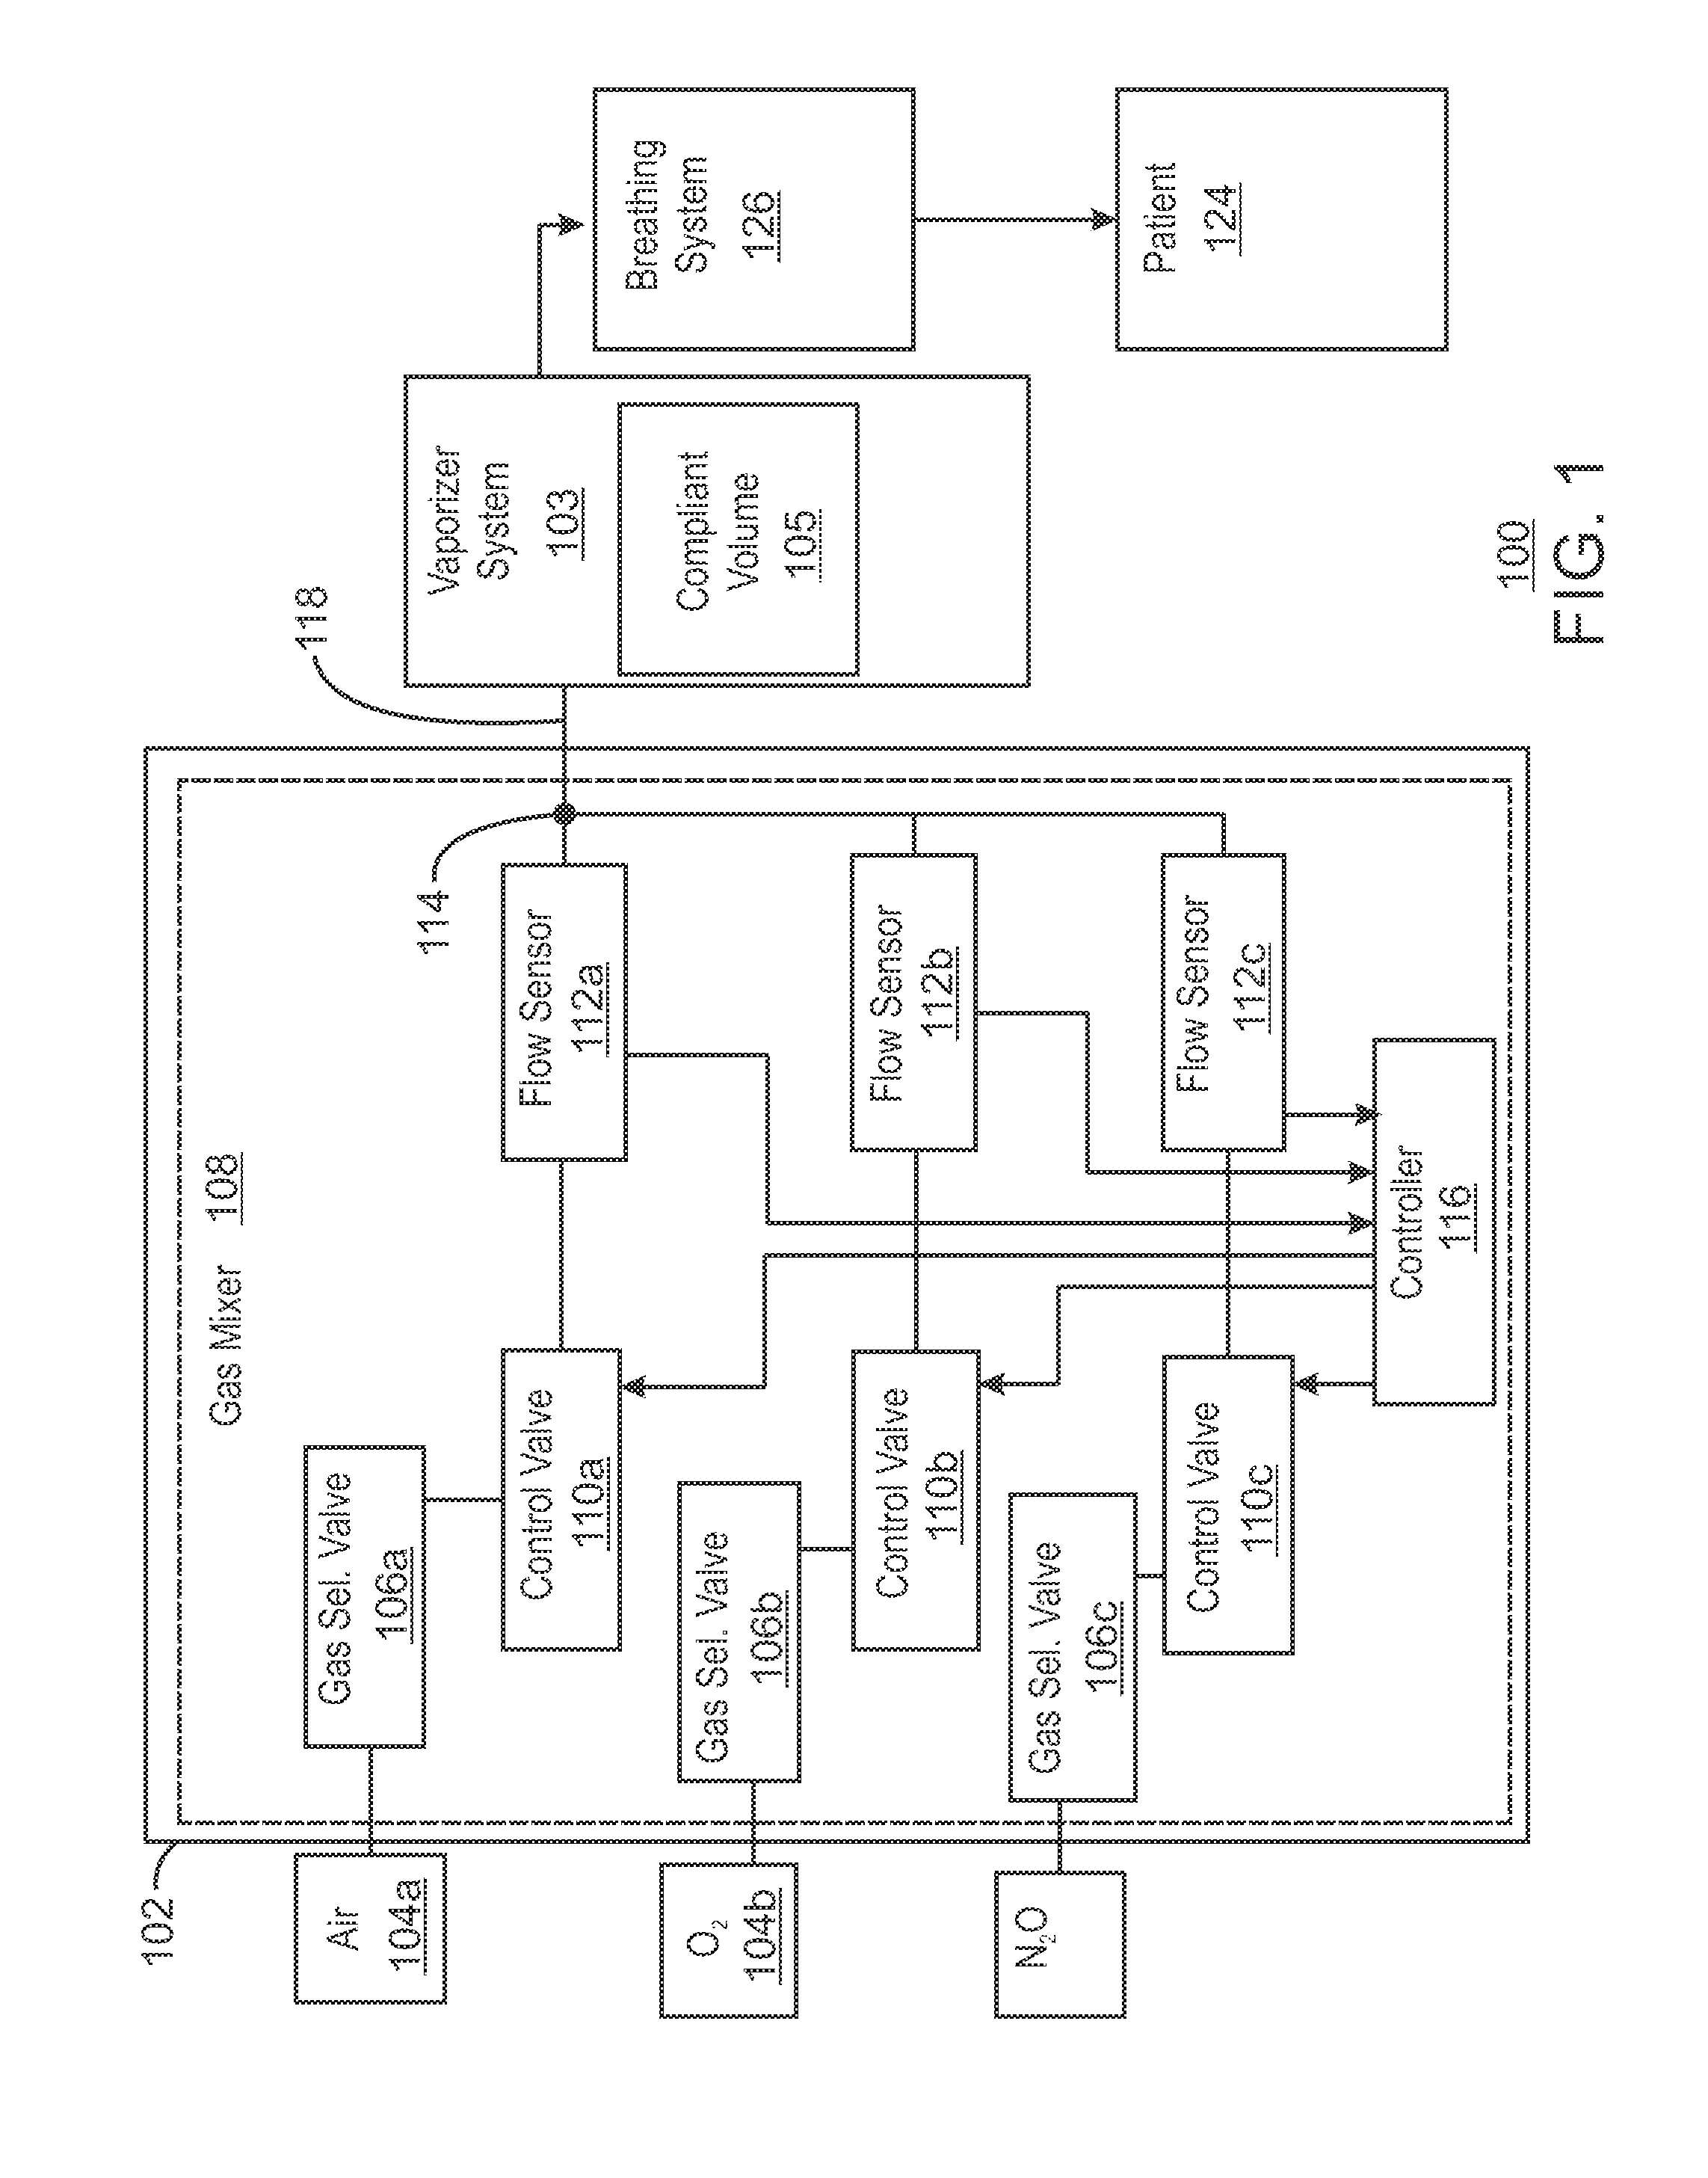 Anesthesia Compliant Volume System and Method